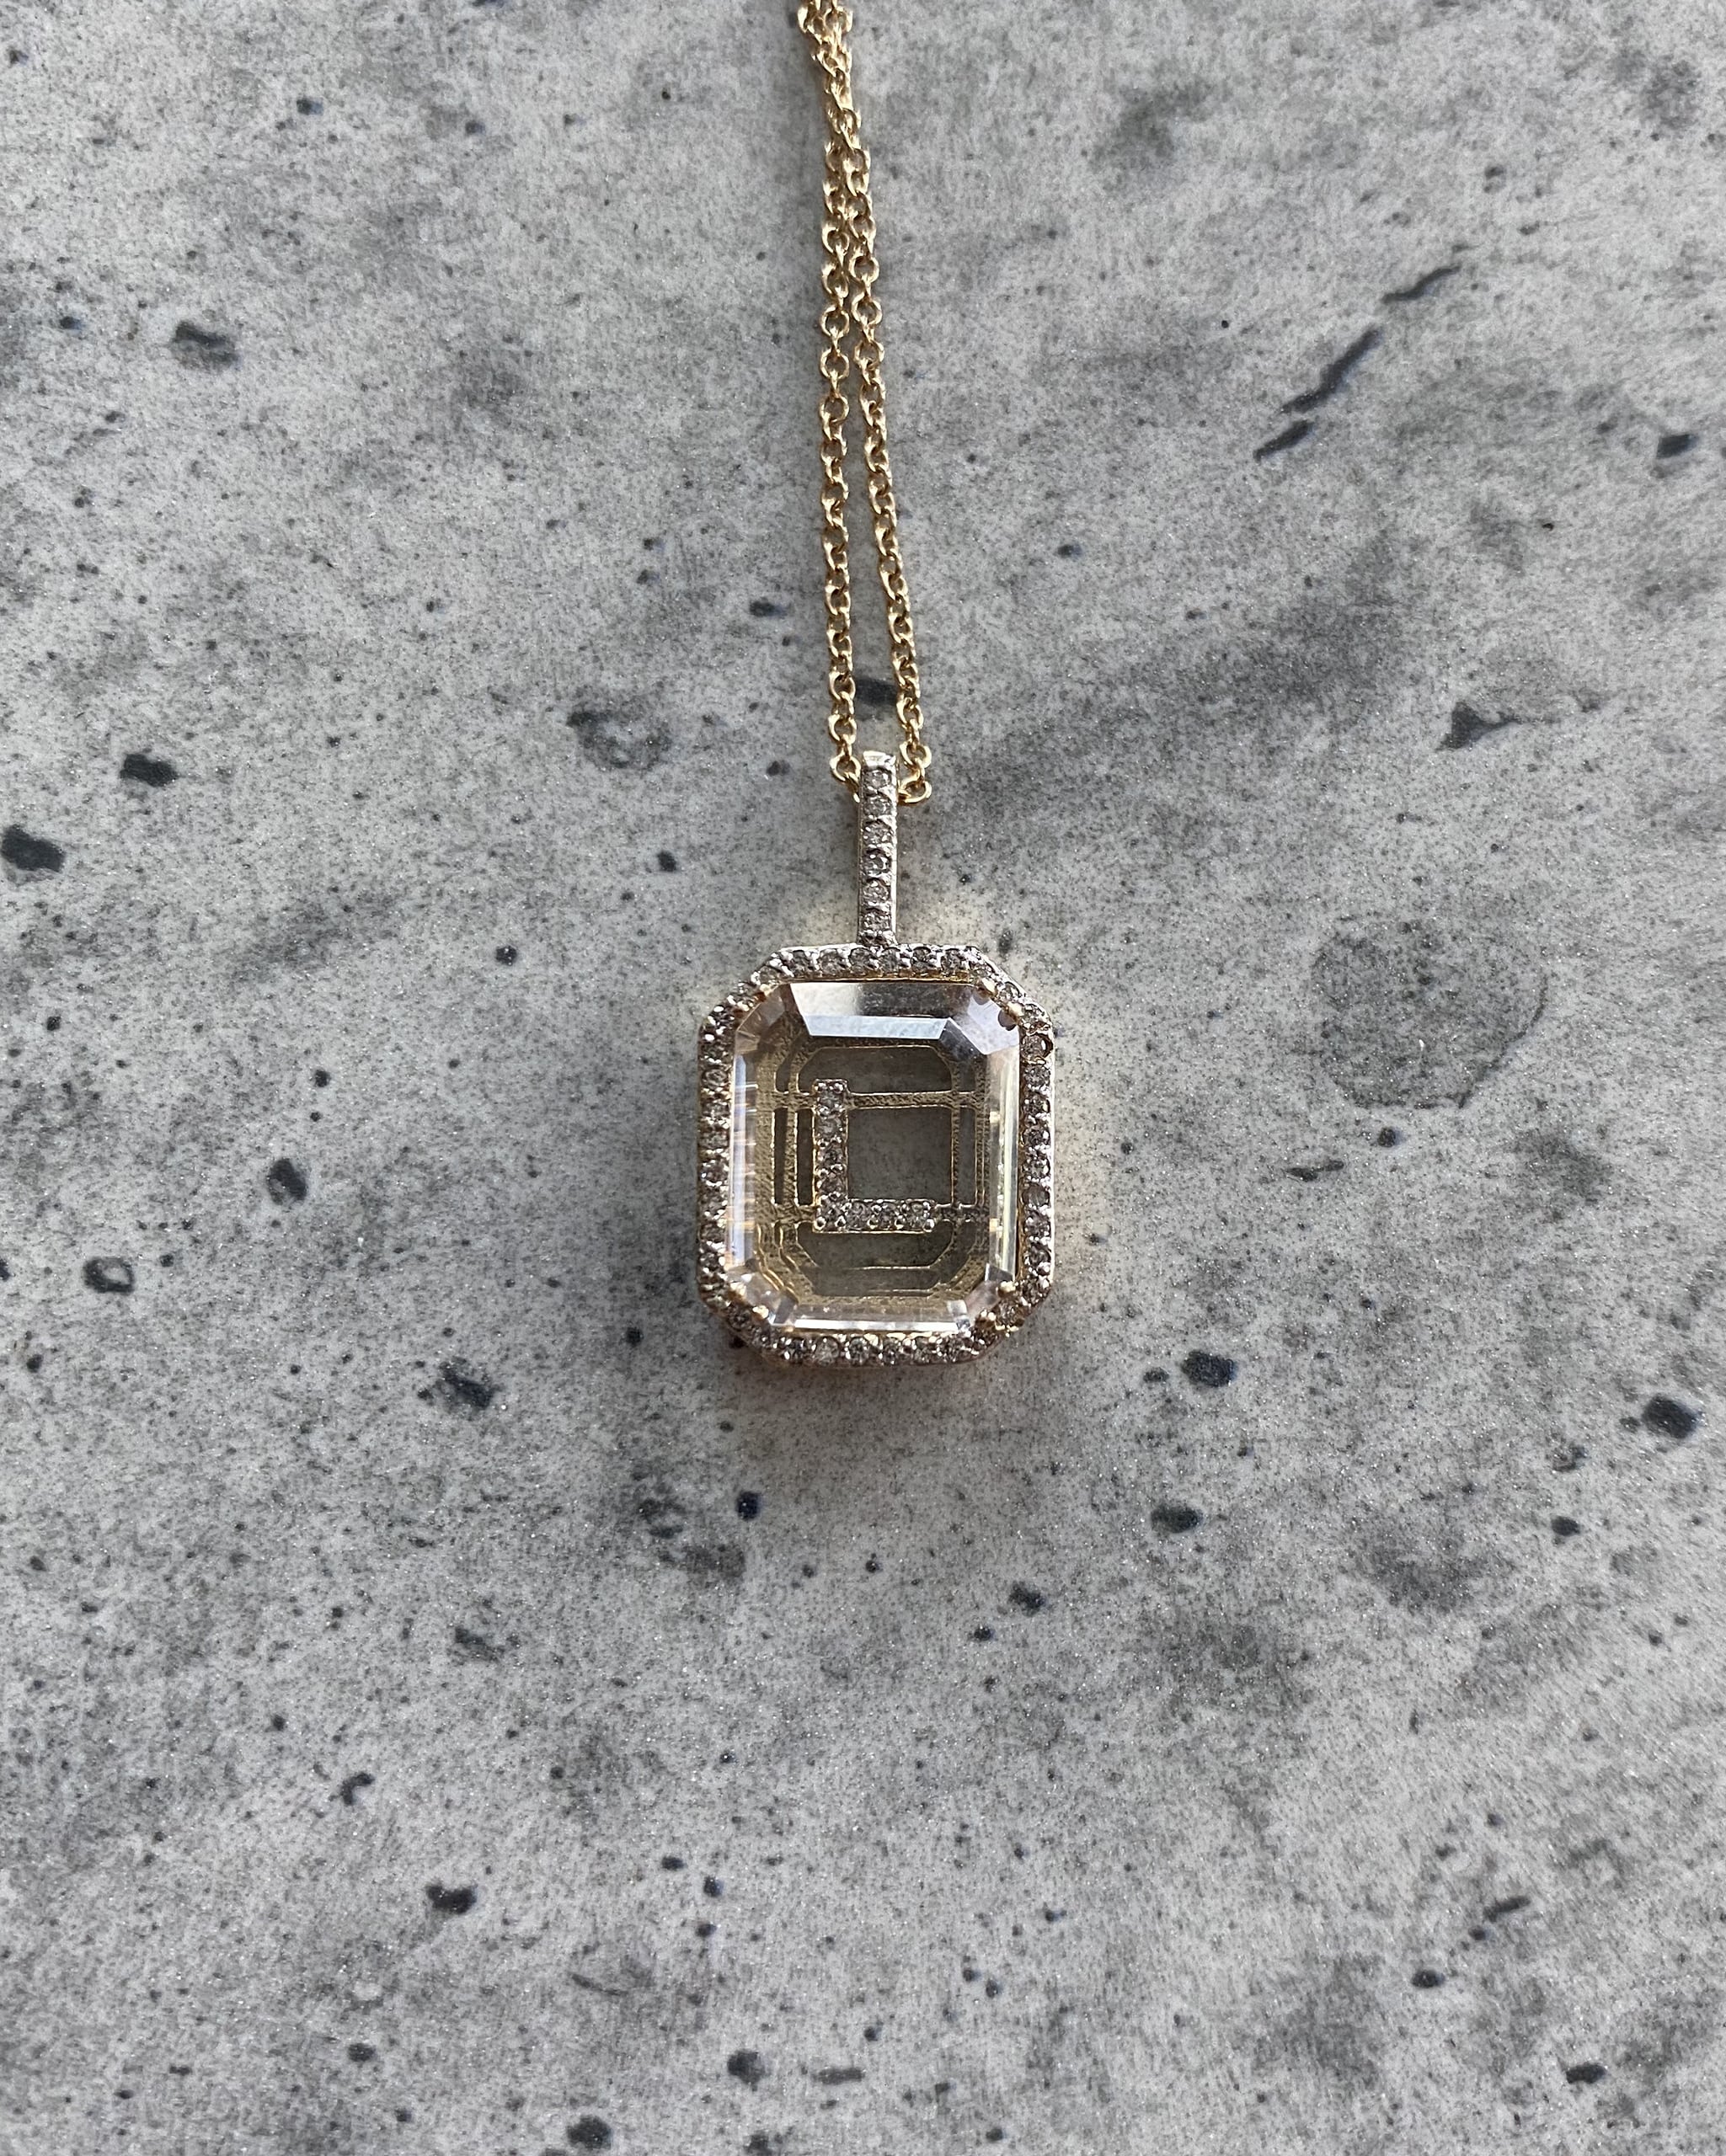 Pave diamond initial pendant necklace from Mateo New York with the letter "L" for Law Roach